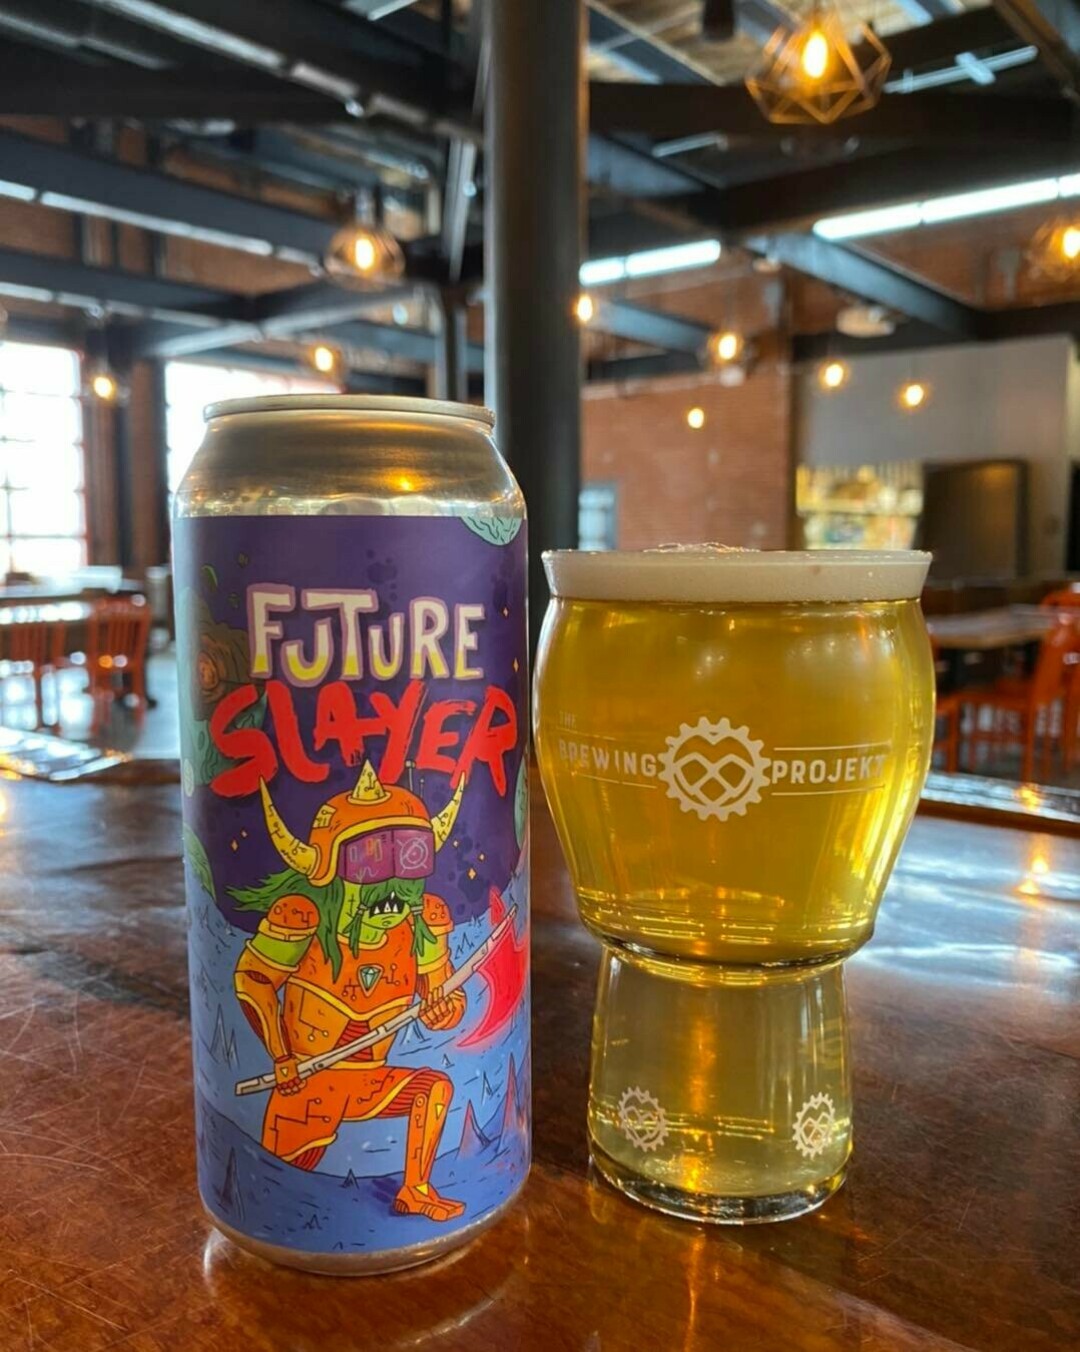 The future is here: The Brewing Projekt brings in this new ale (photo via The Brewing Projekt Facebook).